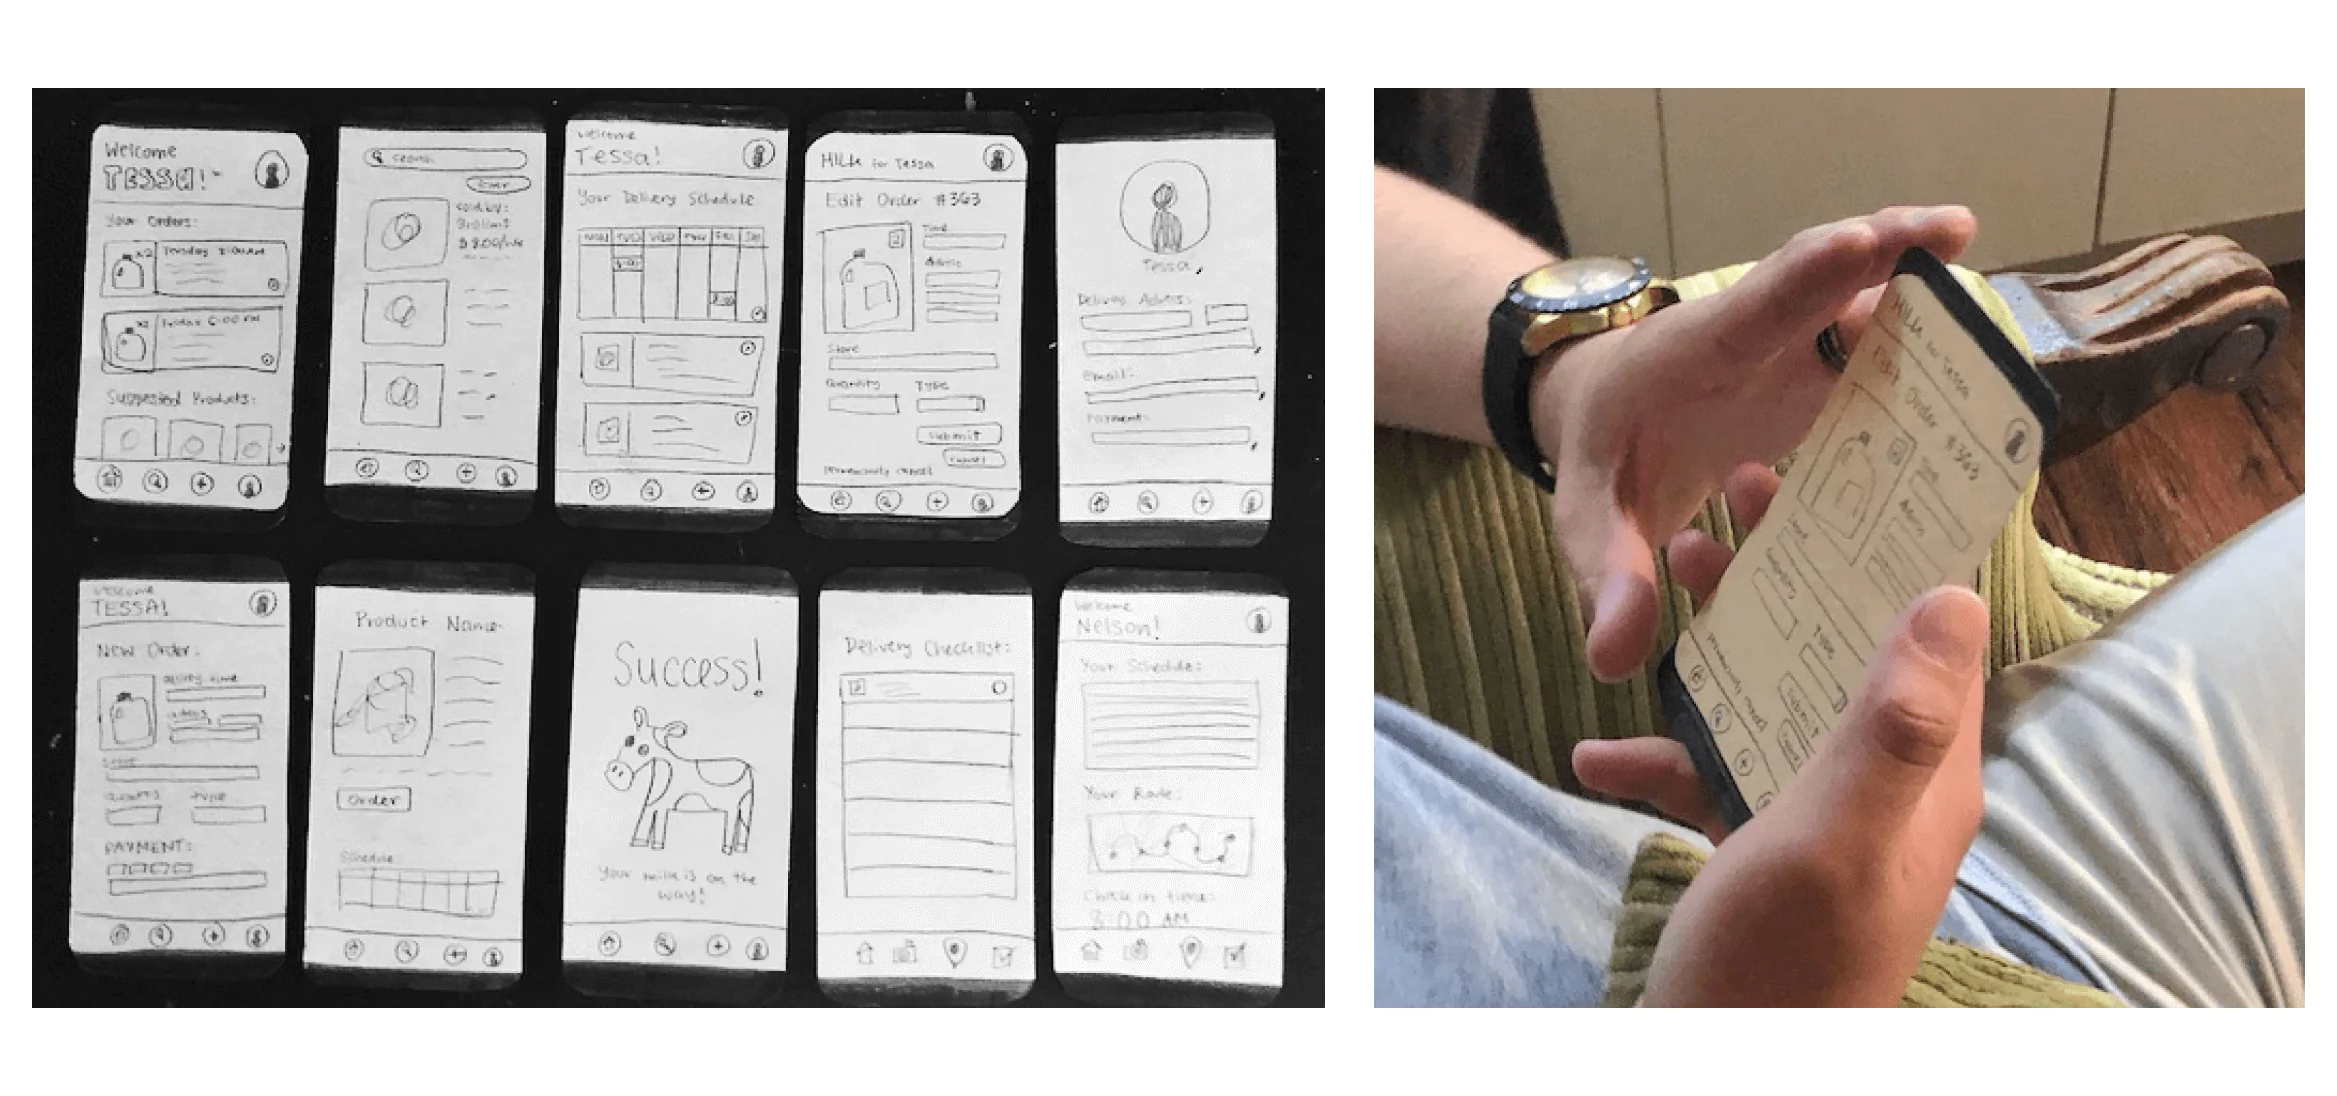 Images of paper wireframes and people using them